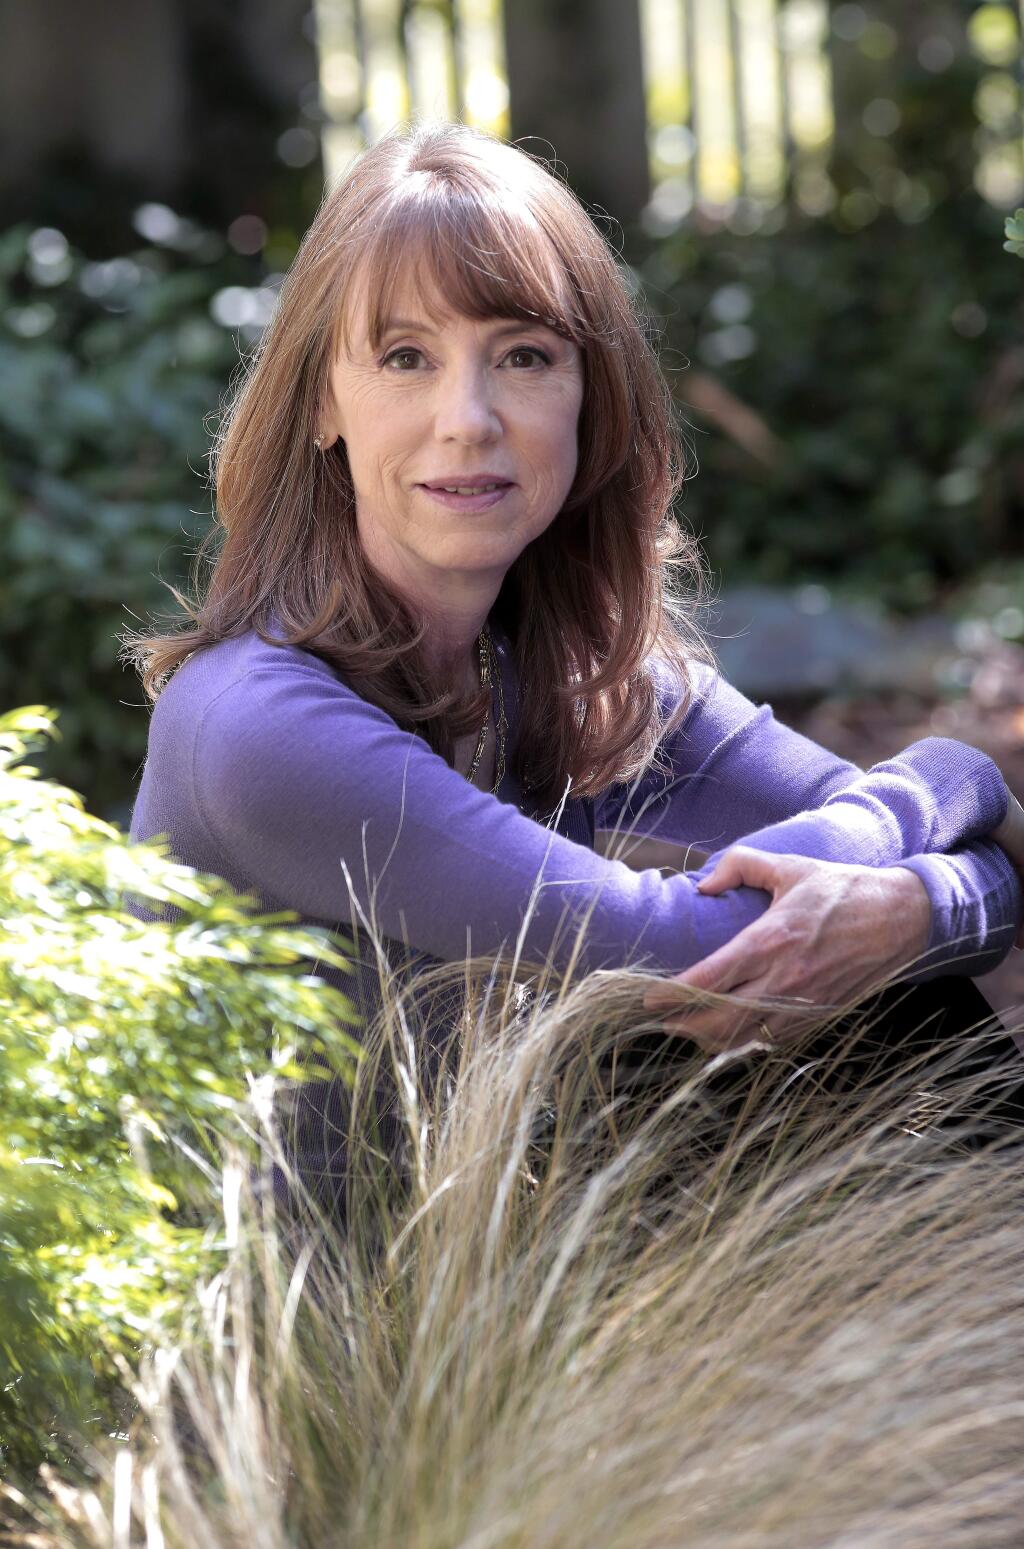 New York Times bestselling author Lisa See will be at the Sonoma Valley Library as part of its Distinguished Speaker Series from 6 to 7:30 p.m. on Wednesday, Feb. 5. See is the author of “Snow Flower and the Secret Fan,” “The Tea Girl of Hummingbird Lane,” “Peony in Love,” “Shanghai Girls,” “Dreams of Joy” and “China Dolls.” Her newest book is “The Island of Sea Women.” (Patricia Williams)